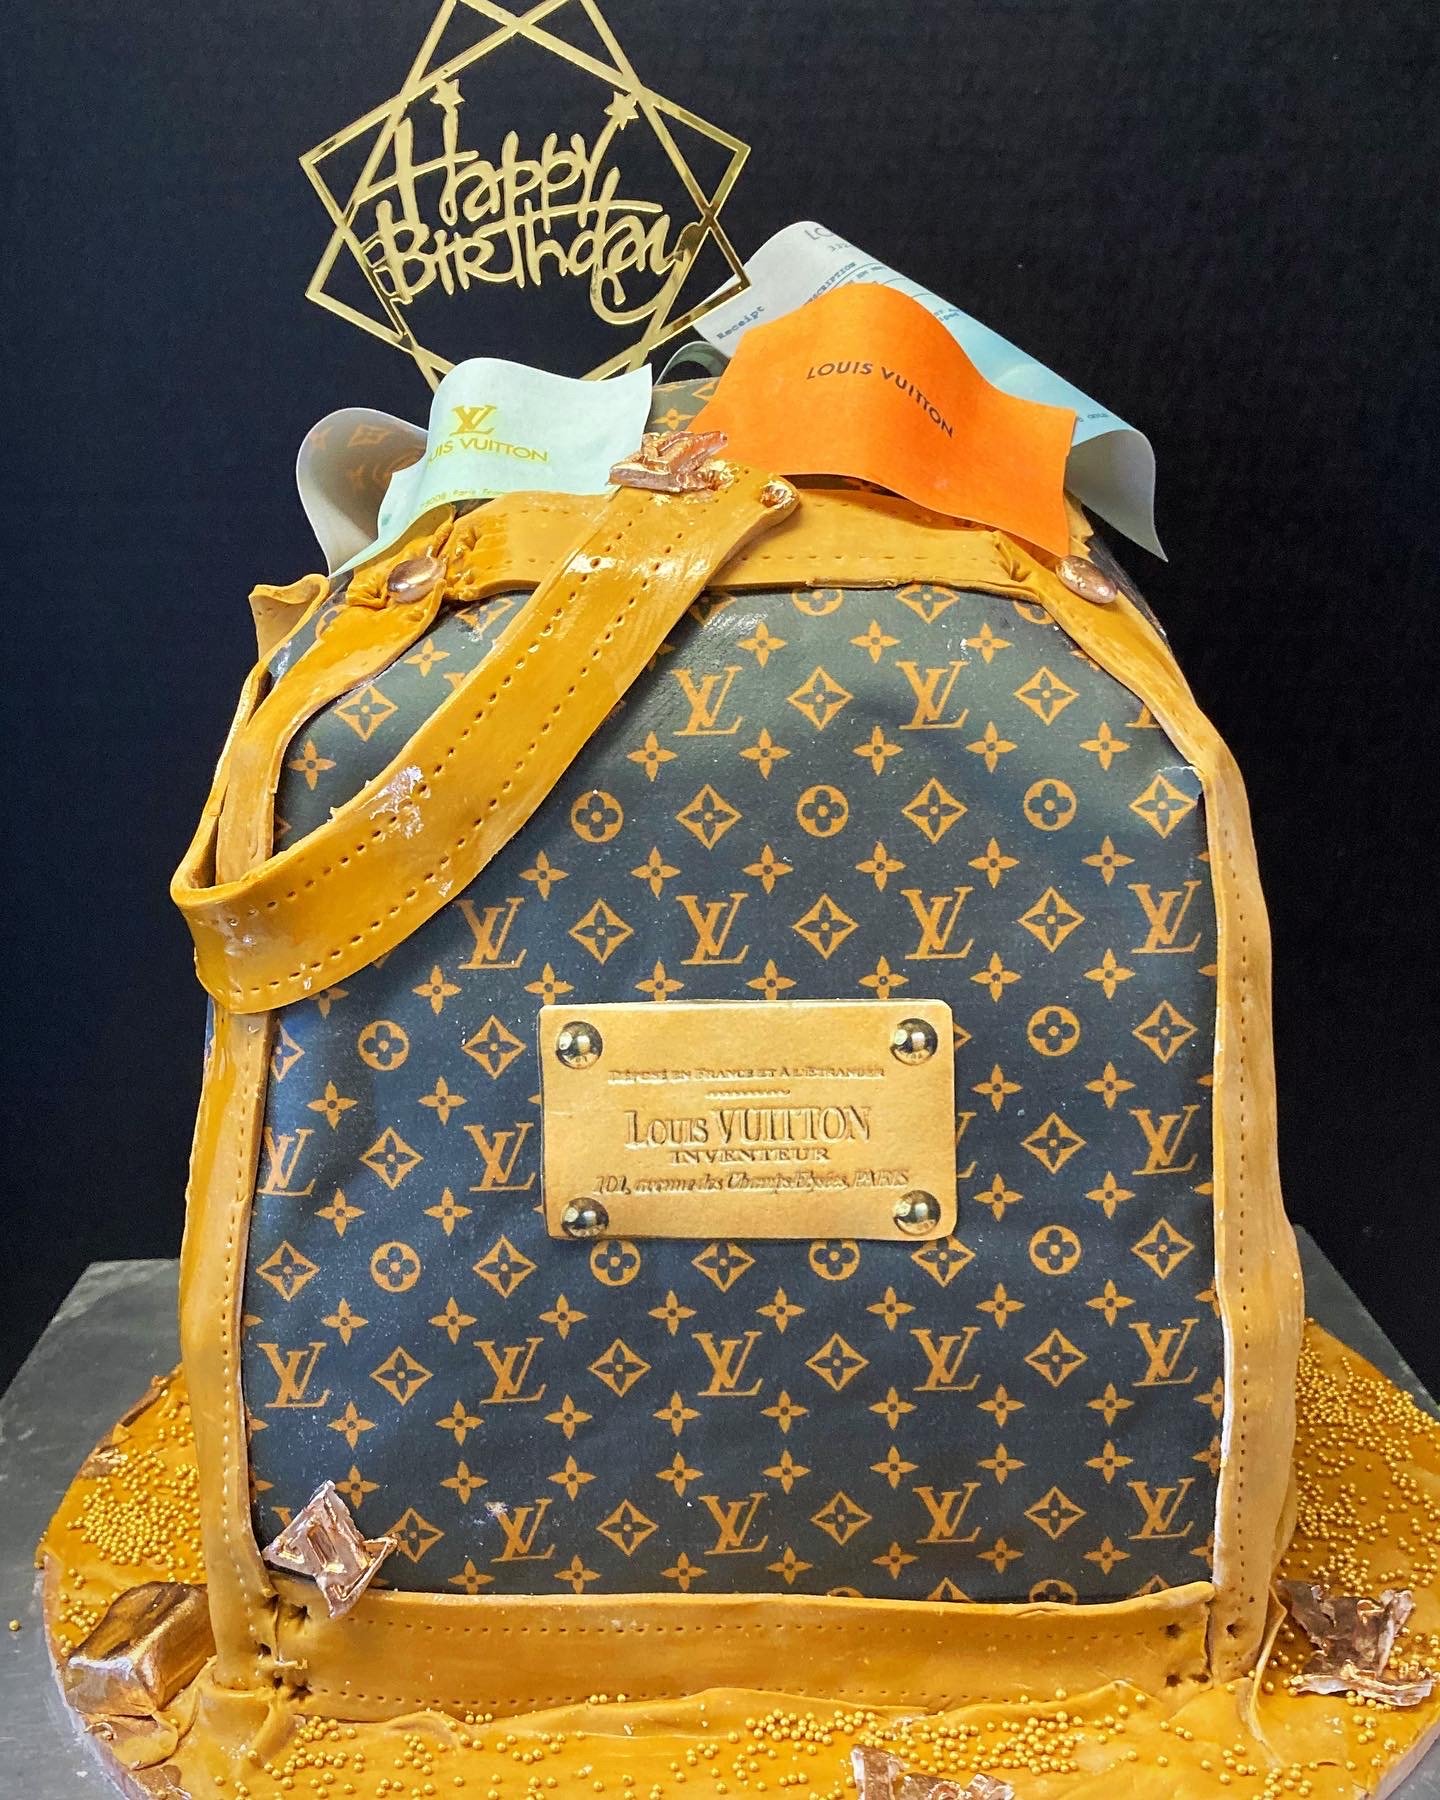 Louis Vuitton Purse And Chanel Purse Cake Picture.jpg